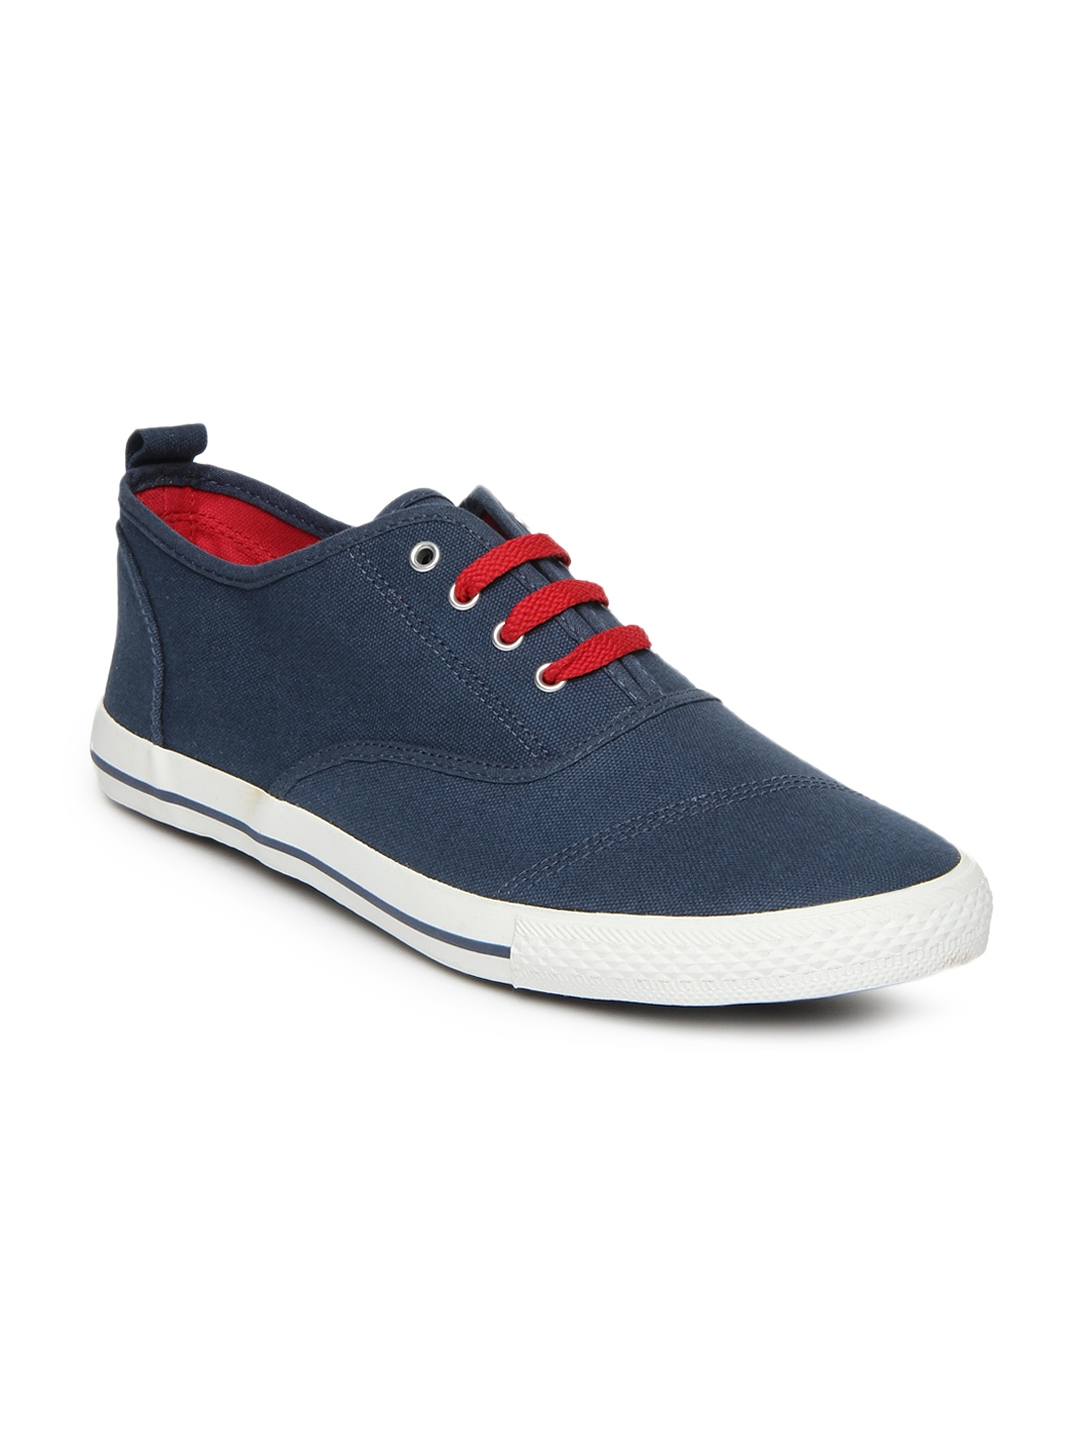 Buy Roadster Men Blue Casual Shoes - Casual Shoes for Men 438545 | Myntra